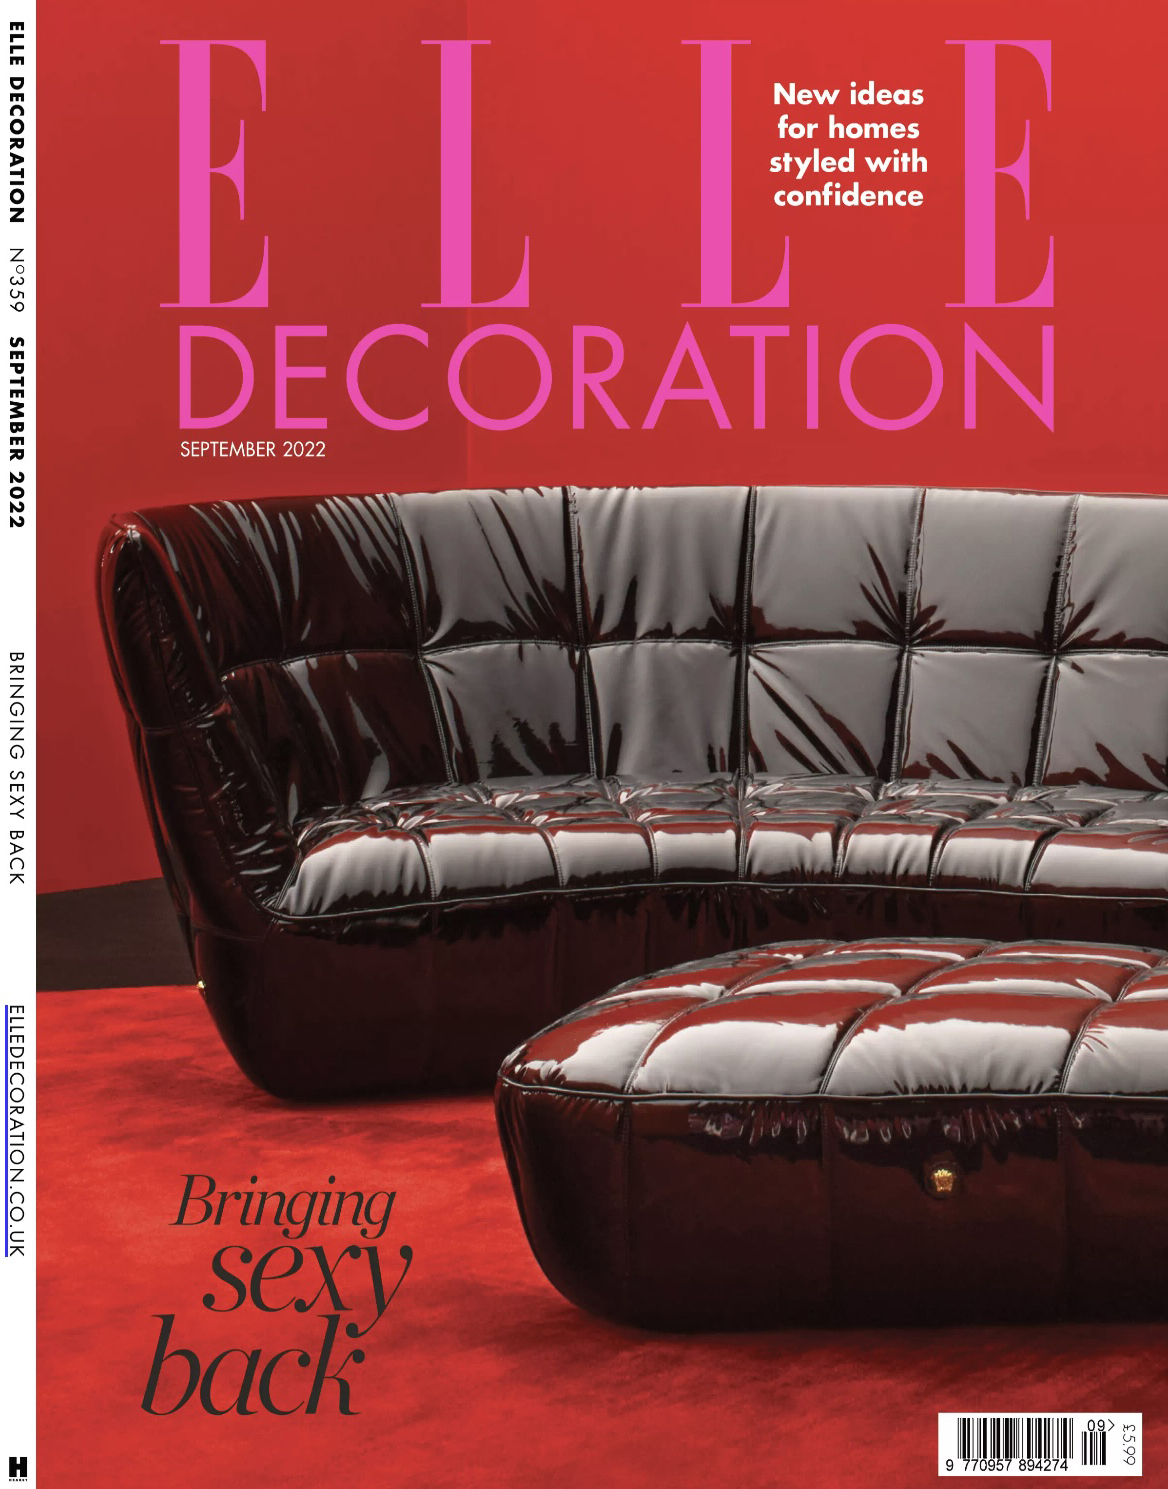 Beetle presented in the Elle Decoration Magazine September 2022